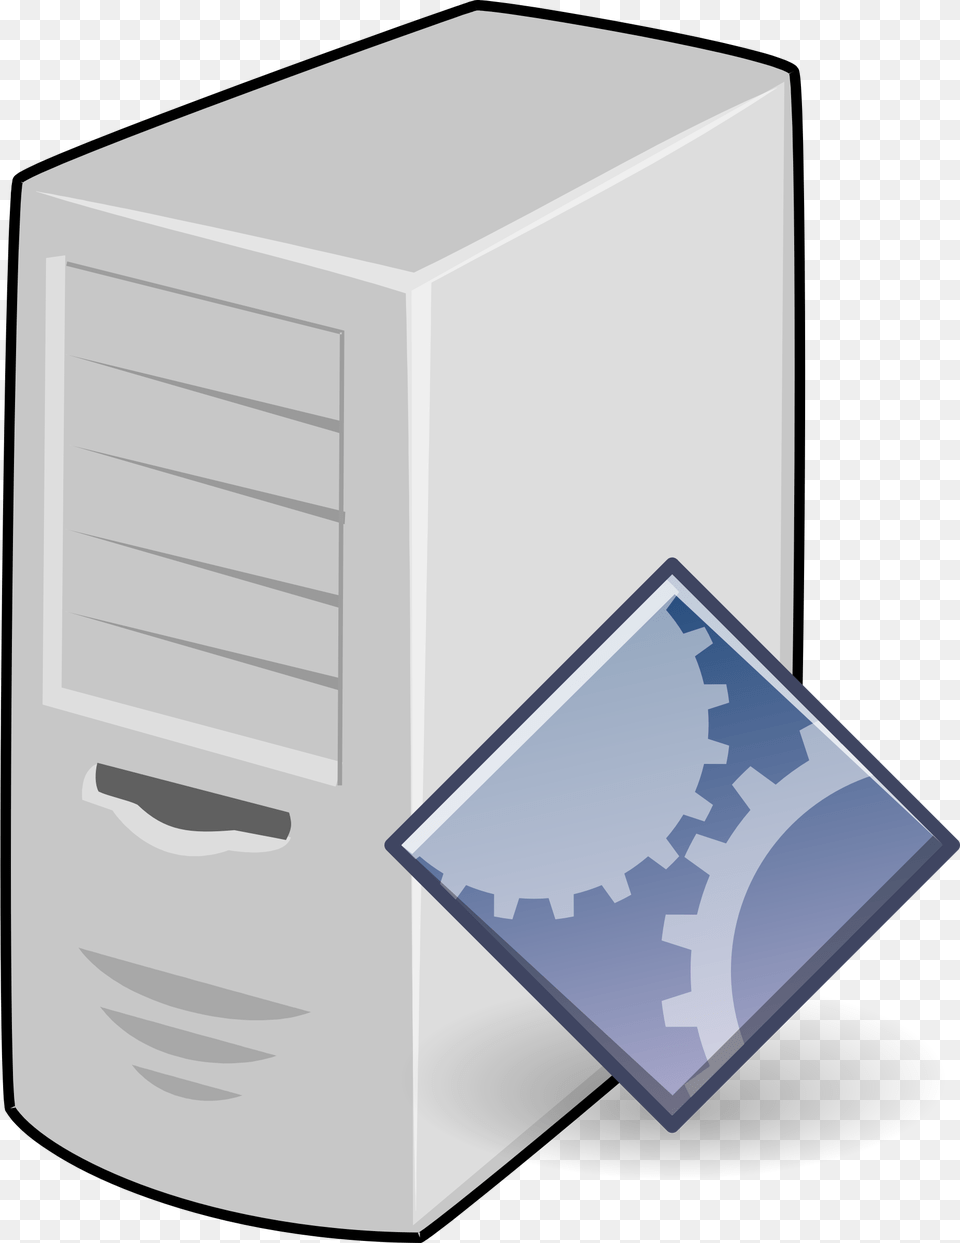 This Icons Design Of Application Server, Computer Hardware, Electronics, Hardware, Computer Free Png